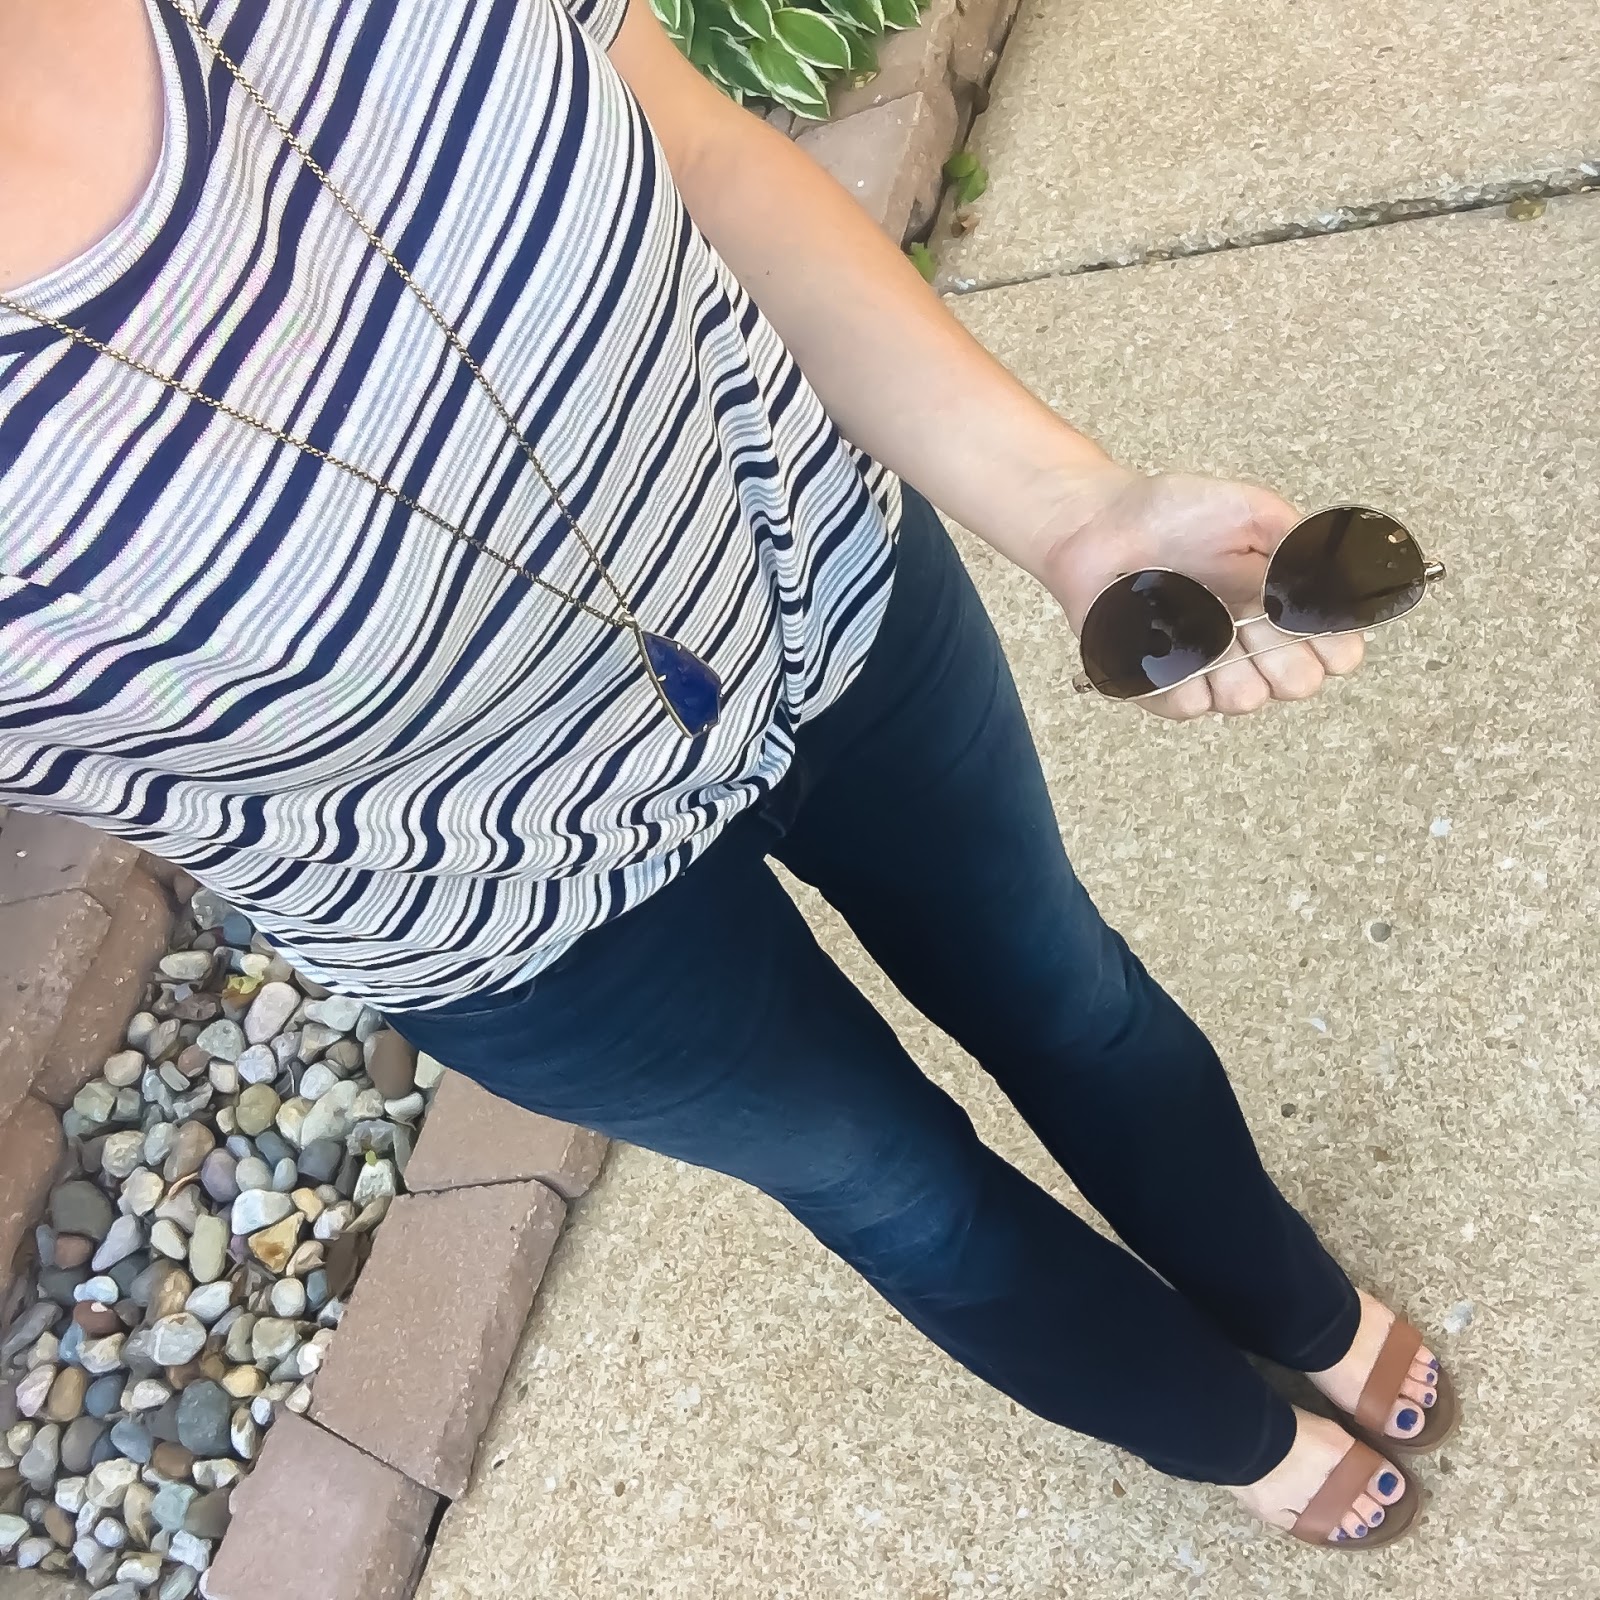 Sincerely Jenna Marie | A St. Louis Life and Style Blog: Insta-recap ...